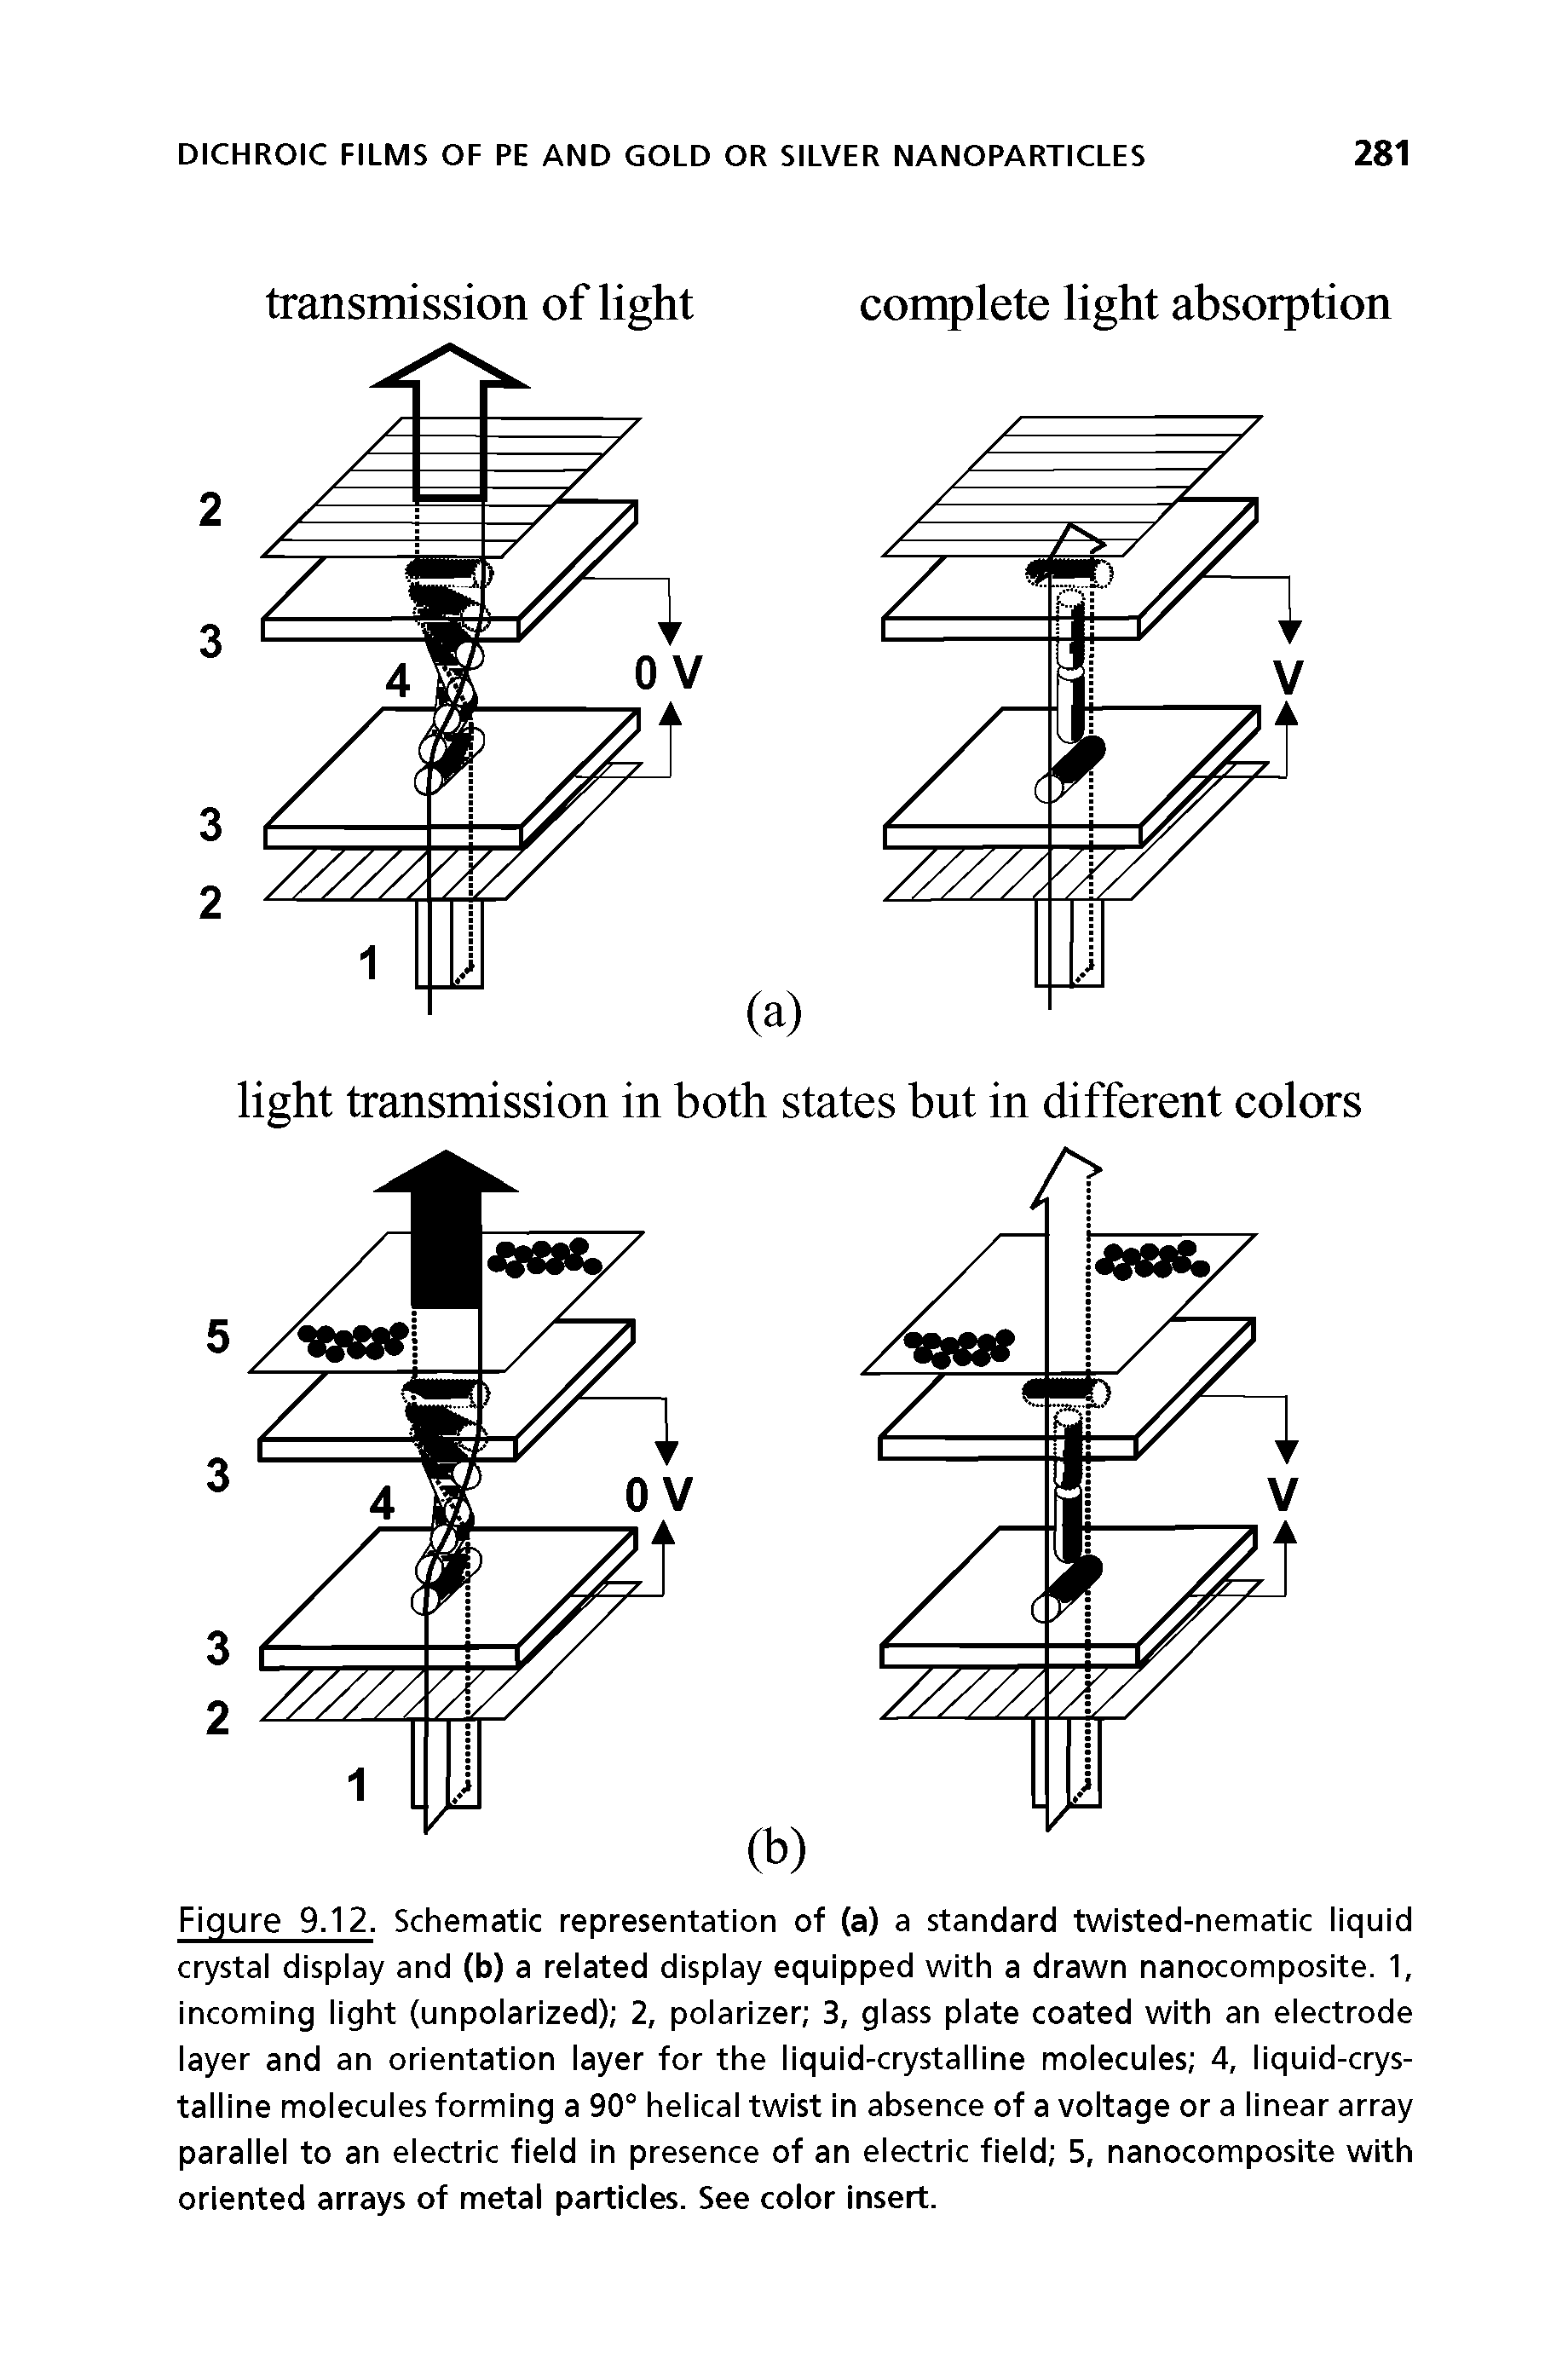 Figure 9.12. Schematic representation of (a) a standard twisted-nematic liquid crystal display and (b) a related display equipped with a drawn nanocomposite. 1, incoming light (unpolarized) 2, polarizer 3, glass plate coated with an electrode layer and an orientation layer for the liquid-crystalline molecules 4, liquid-crystalline molecules forming a 90° helical twist in absence of a voltage or a linear array parallel to an electric field in presence of an electric field 5, nanocomposite with oriented arrays of metal particles. See color insert.